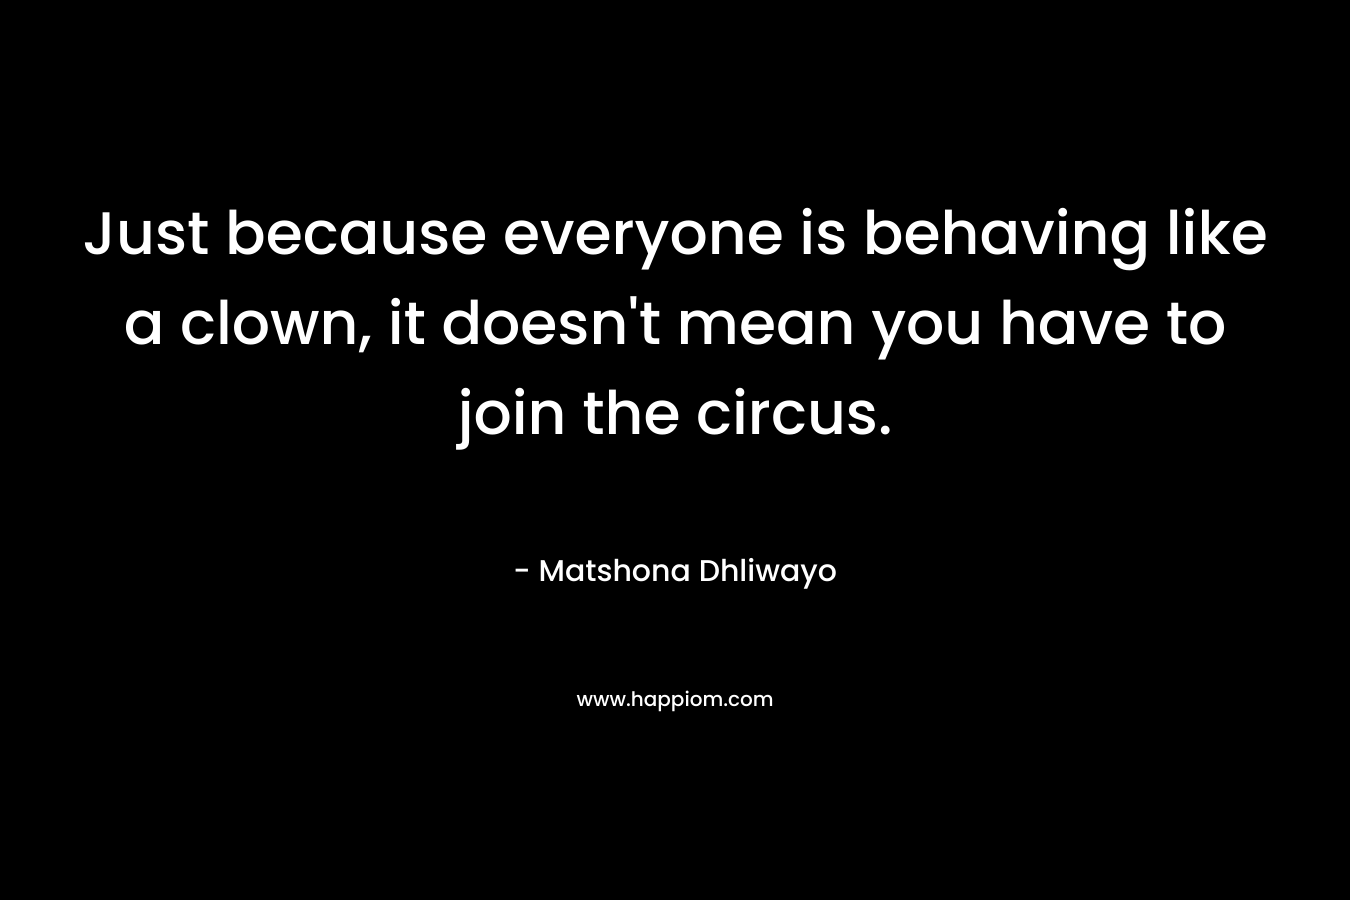 Just because everyone is behaving like a clown, it doesn't mean you have to join the circus.